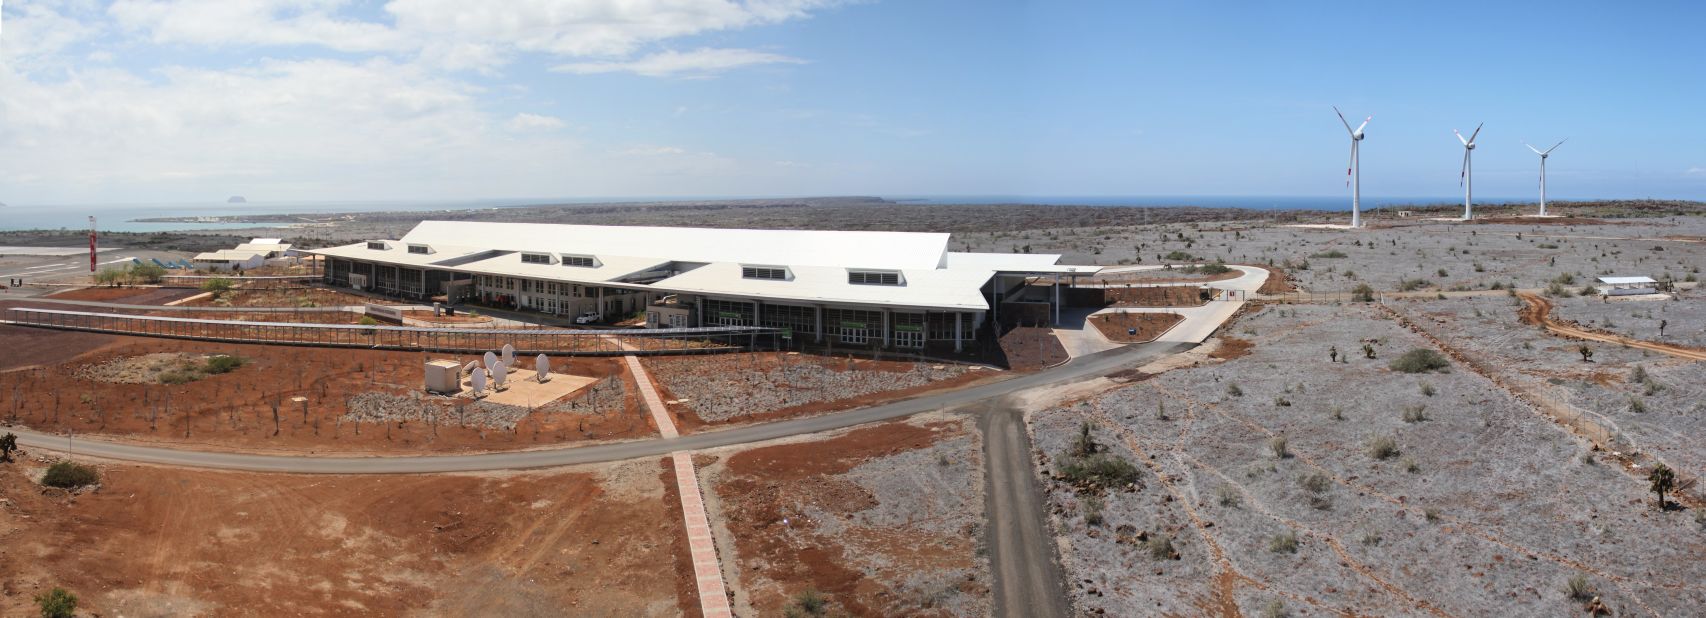 Galapagos Ecological Airport was designed to blend in and maintain the natural surroundings. It received the LEED Gold certification from the US Green Building Council in 2014. 